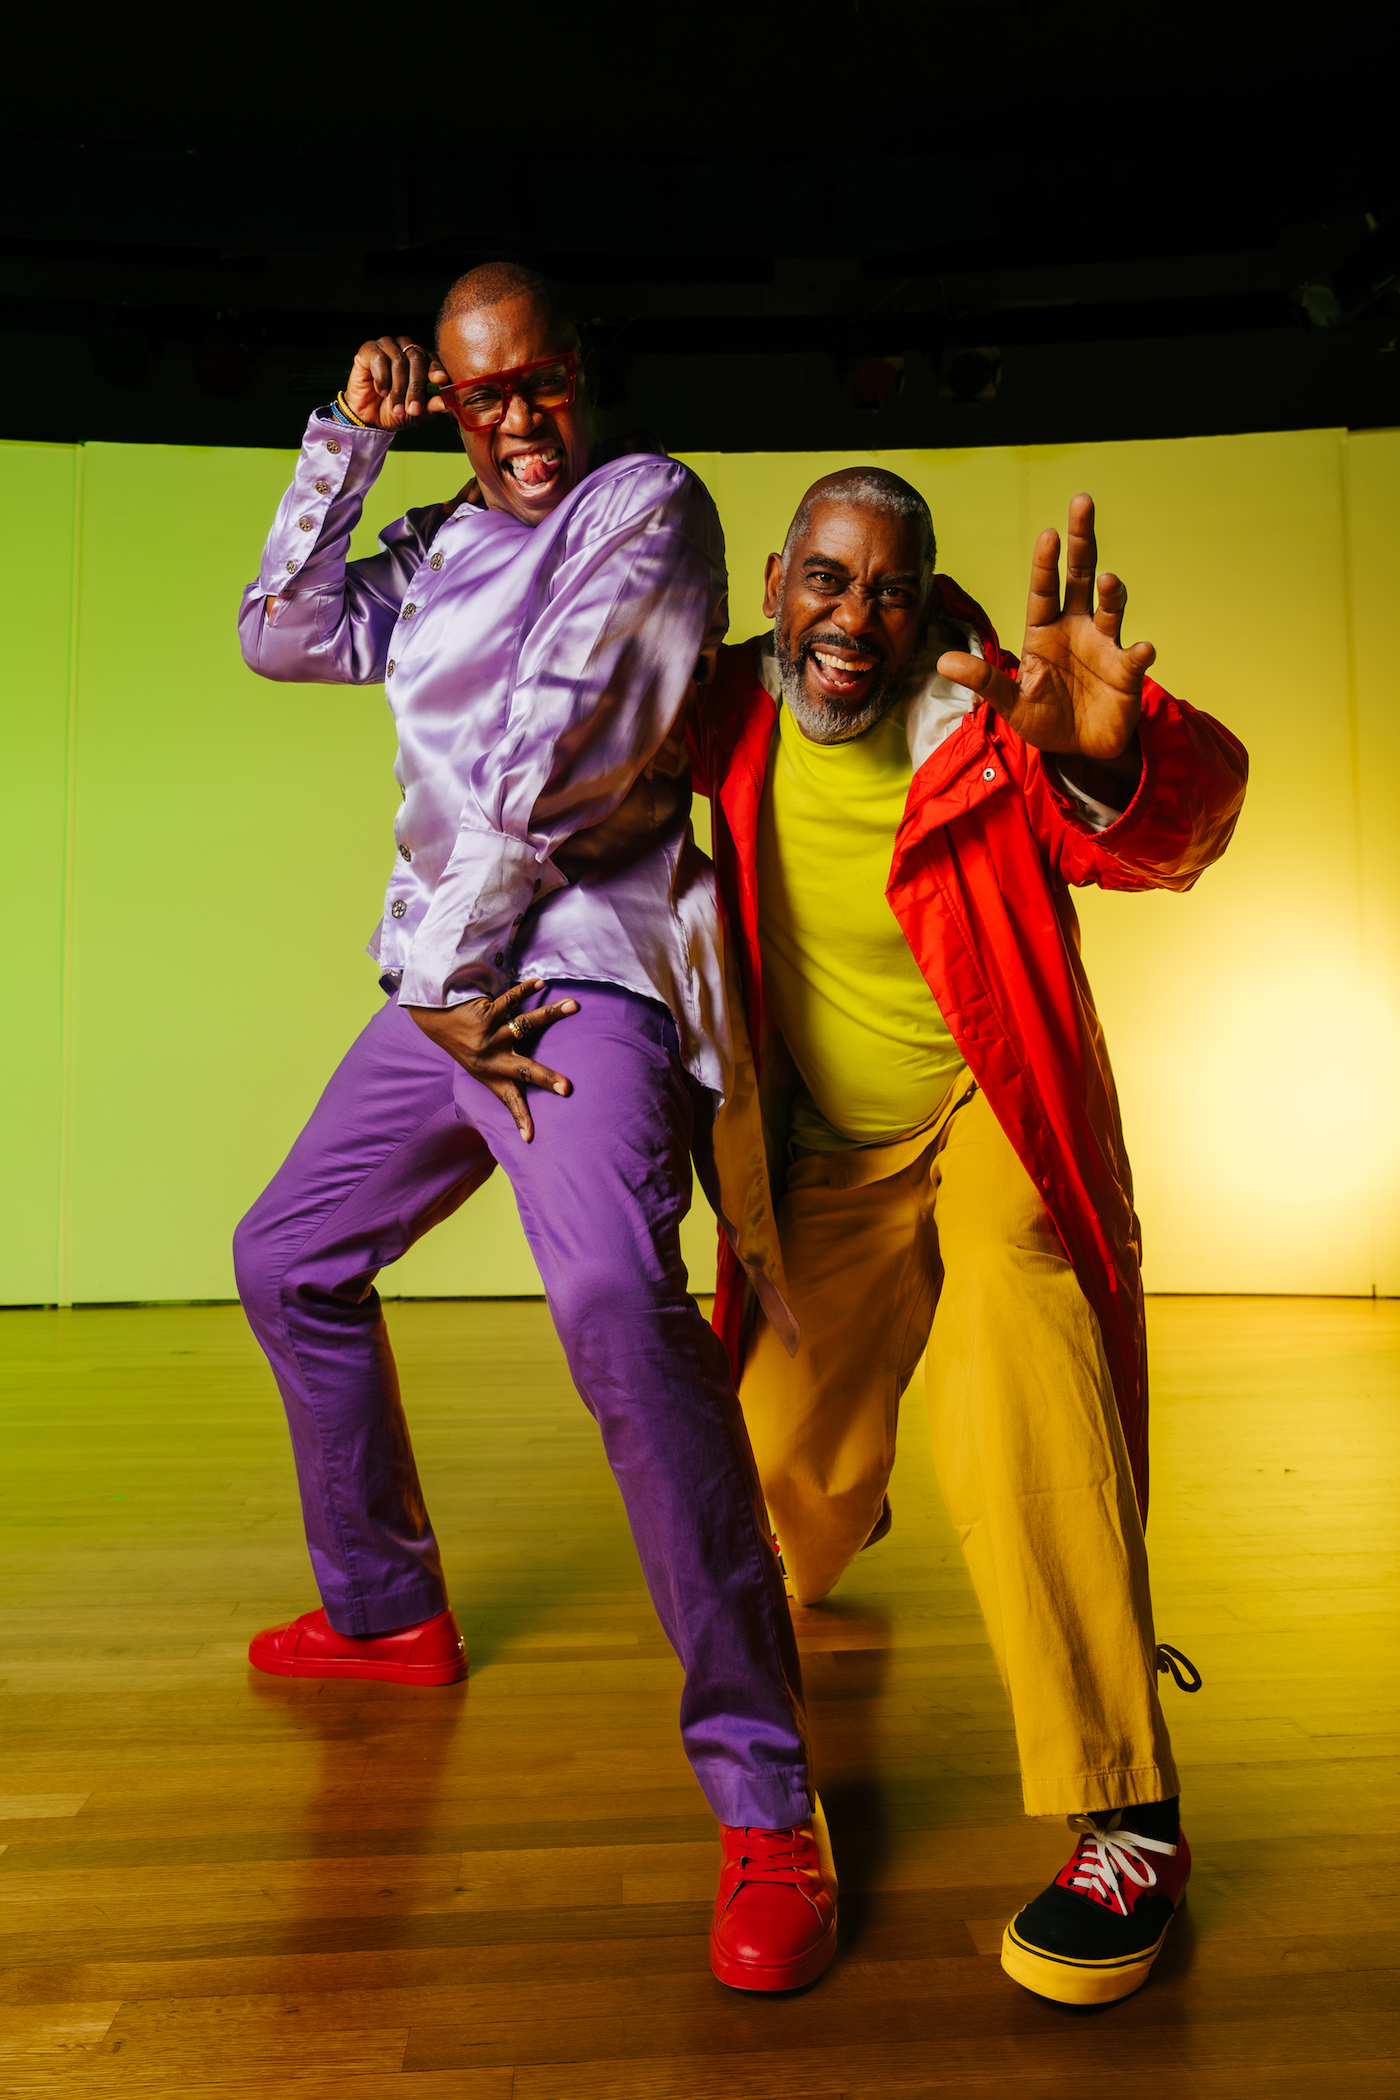 Two people on stage looking at camera wearing bright clothing with bright background